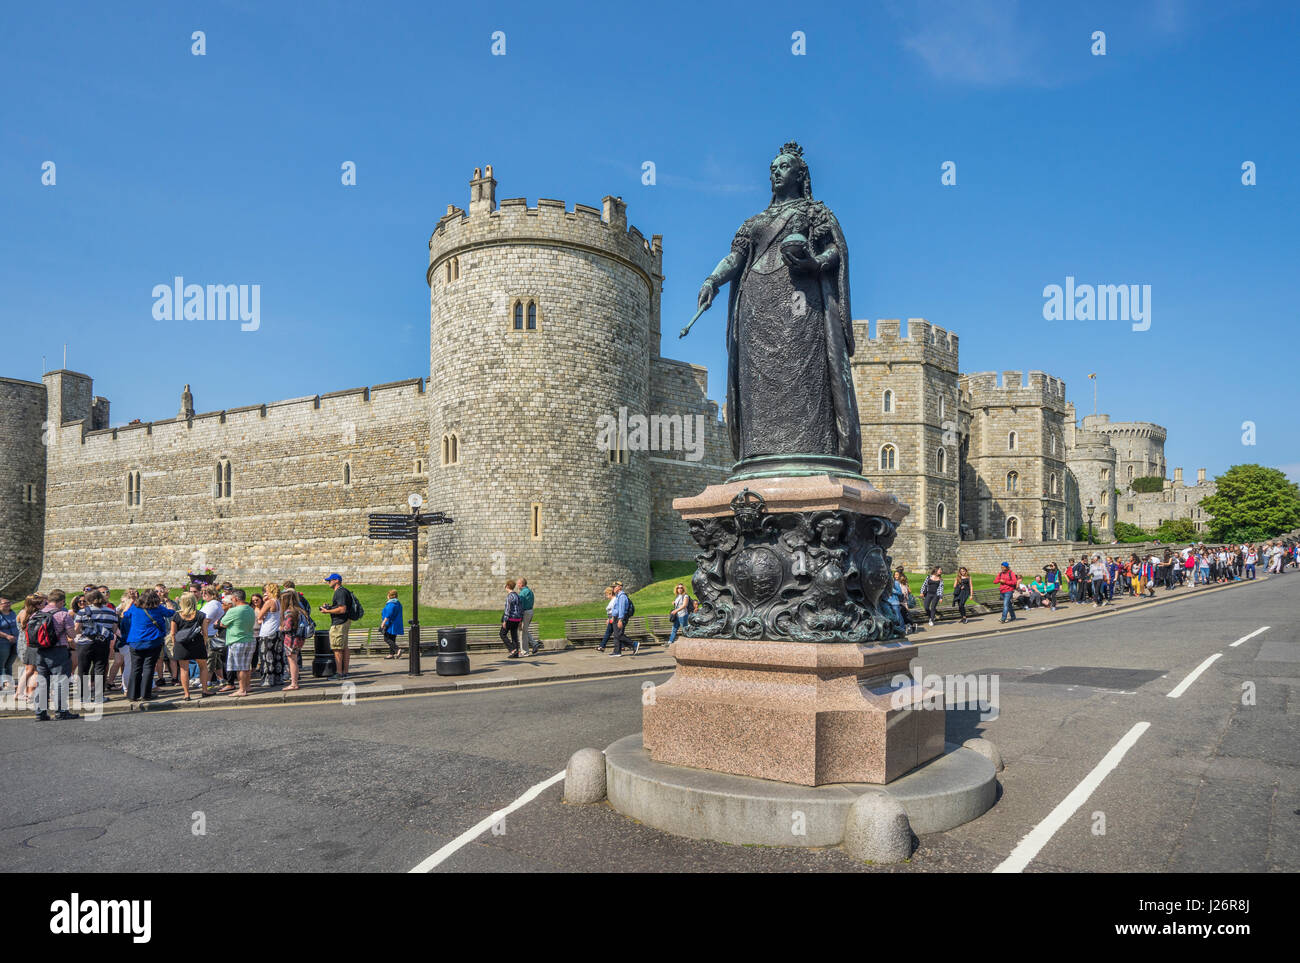 United Kingdom, England, Berkshire, Windsor, Queen Victoria Statue against the backdrop of Windsor Castle and the Salisbury Tower Stock Photo